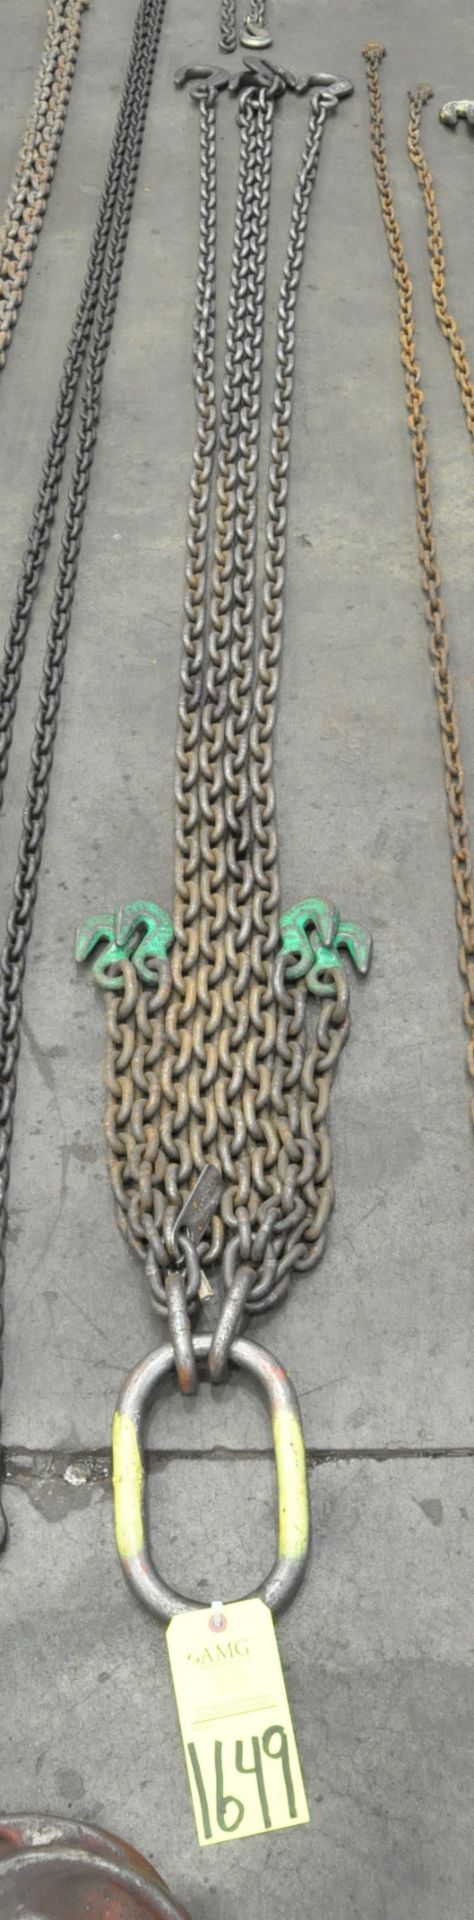 3/8" Link x 9' Long 4-Hook Chain Sling with (4) Chokers, Cert Tag, (G-24), (Yellow Tag)